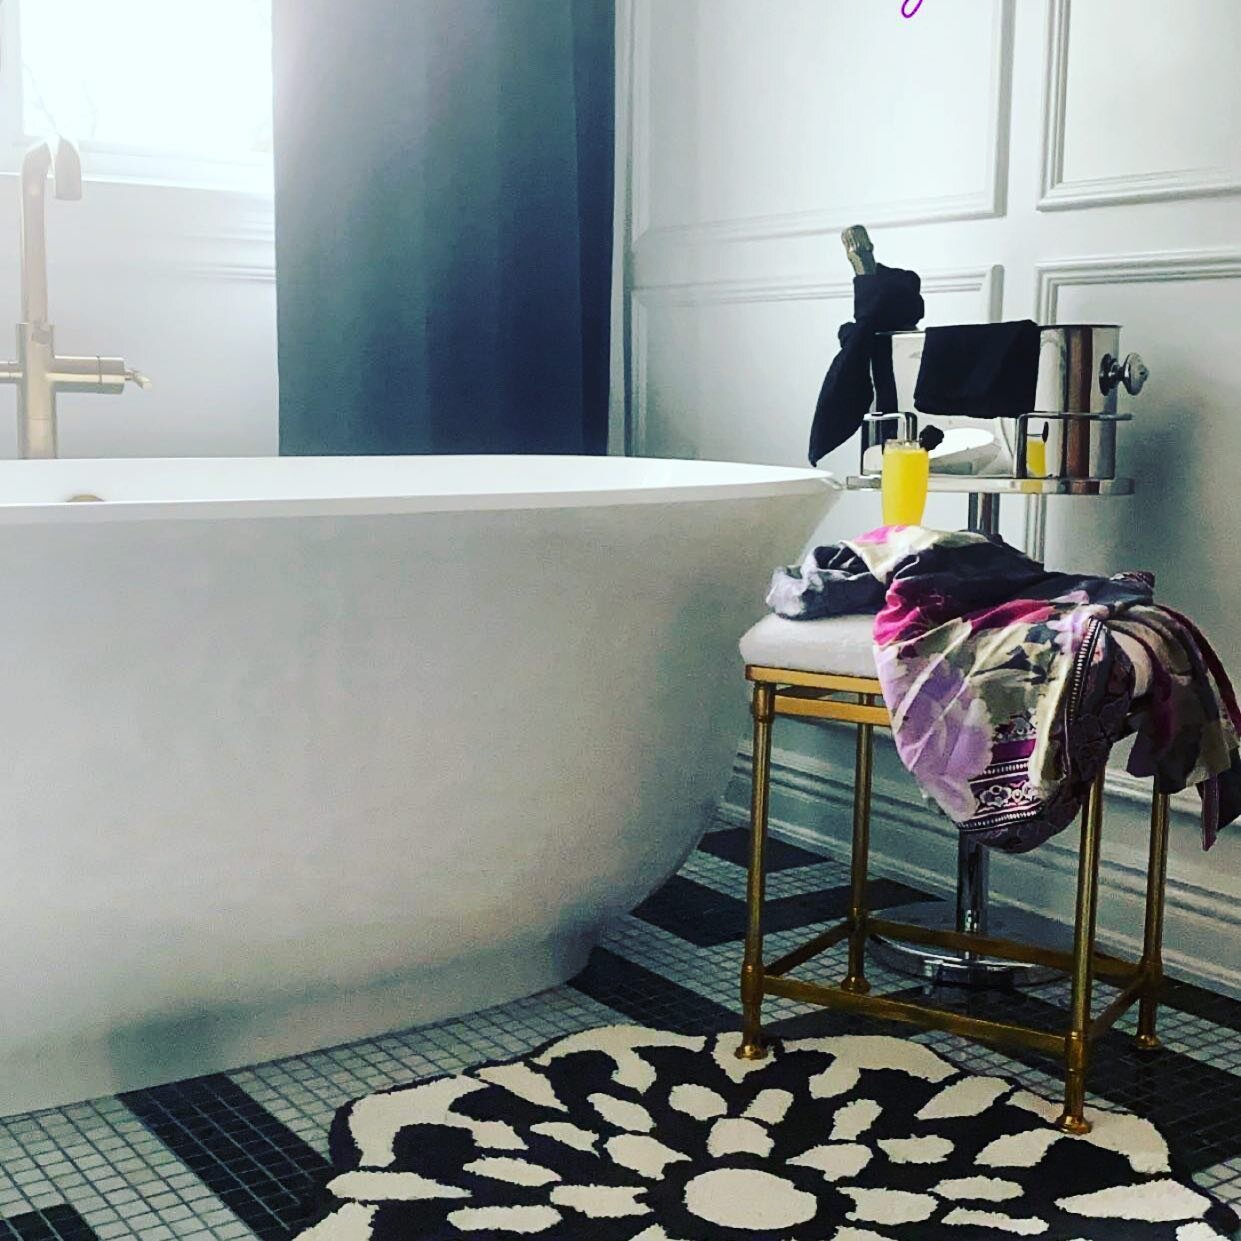 This rainy Sunday has me all sorts of relaxed....any other ladies need some serious me time??? Tagged some of my favorites as a reminder to take a minute (or 60) for yourselves today... #chicagointeriordesign #bathroomdesign #metime💕 #sundayvibes